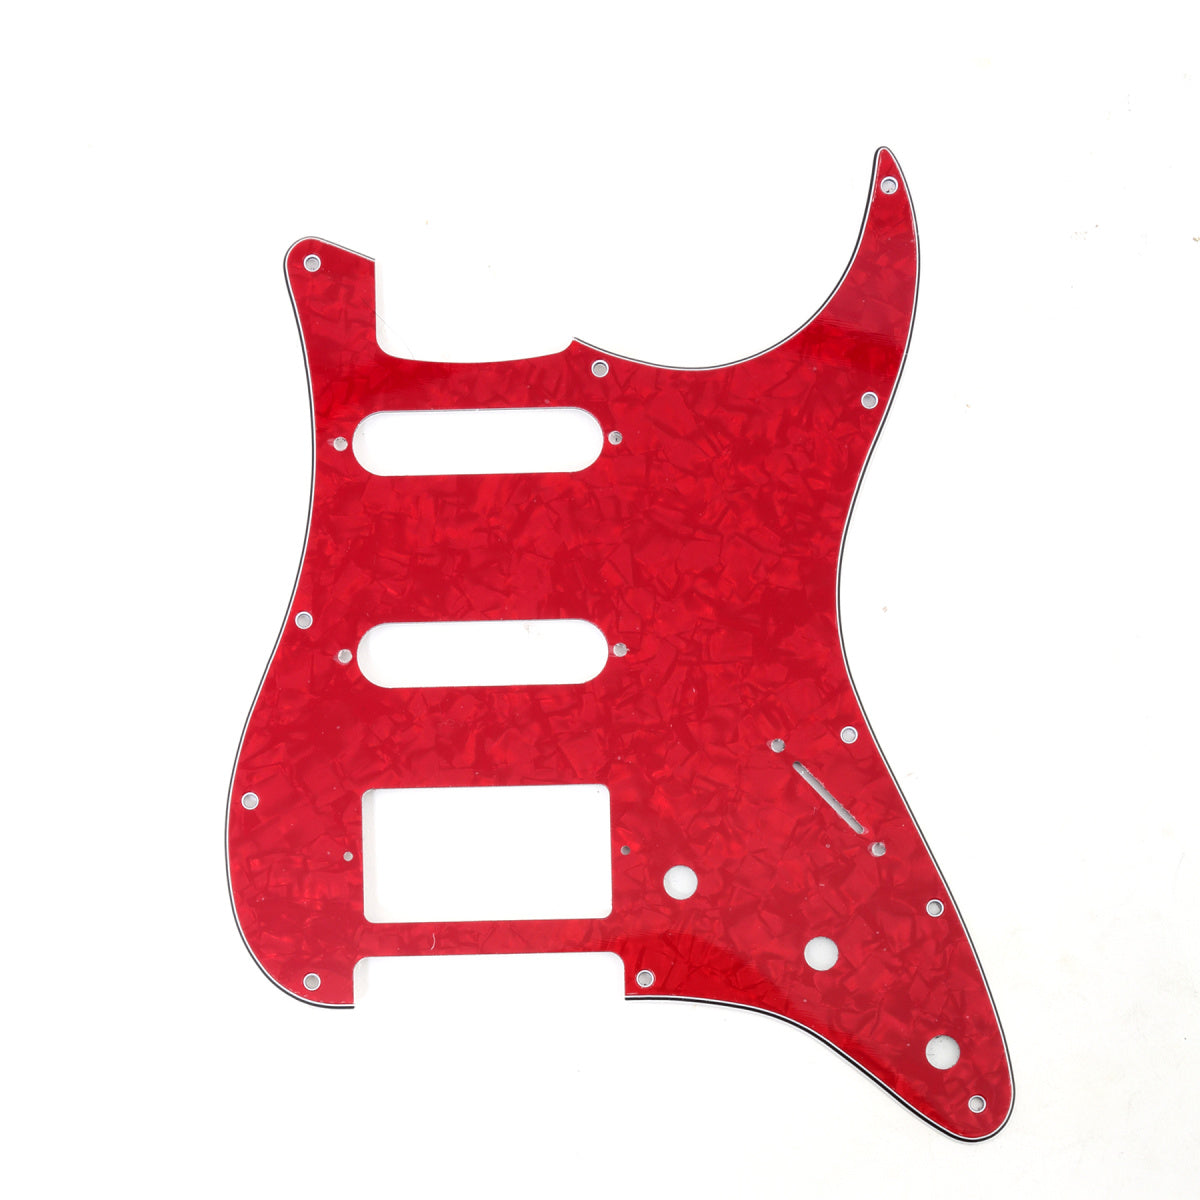 Musiclily HSS 11 Hole Guitar Strat Pickguard for Fender USA/Mexican Made Standard Stratocaster Modern Style,  4Ply Red Pearl